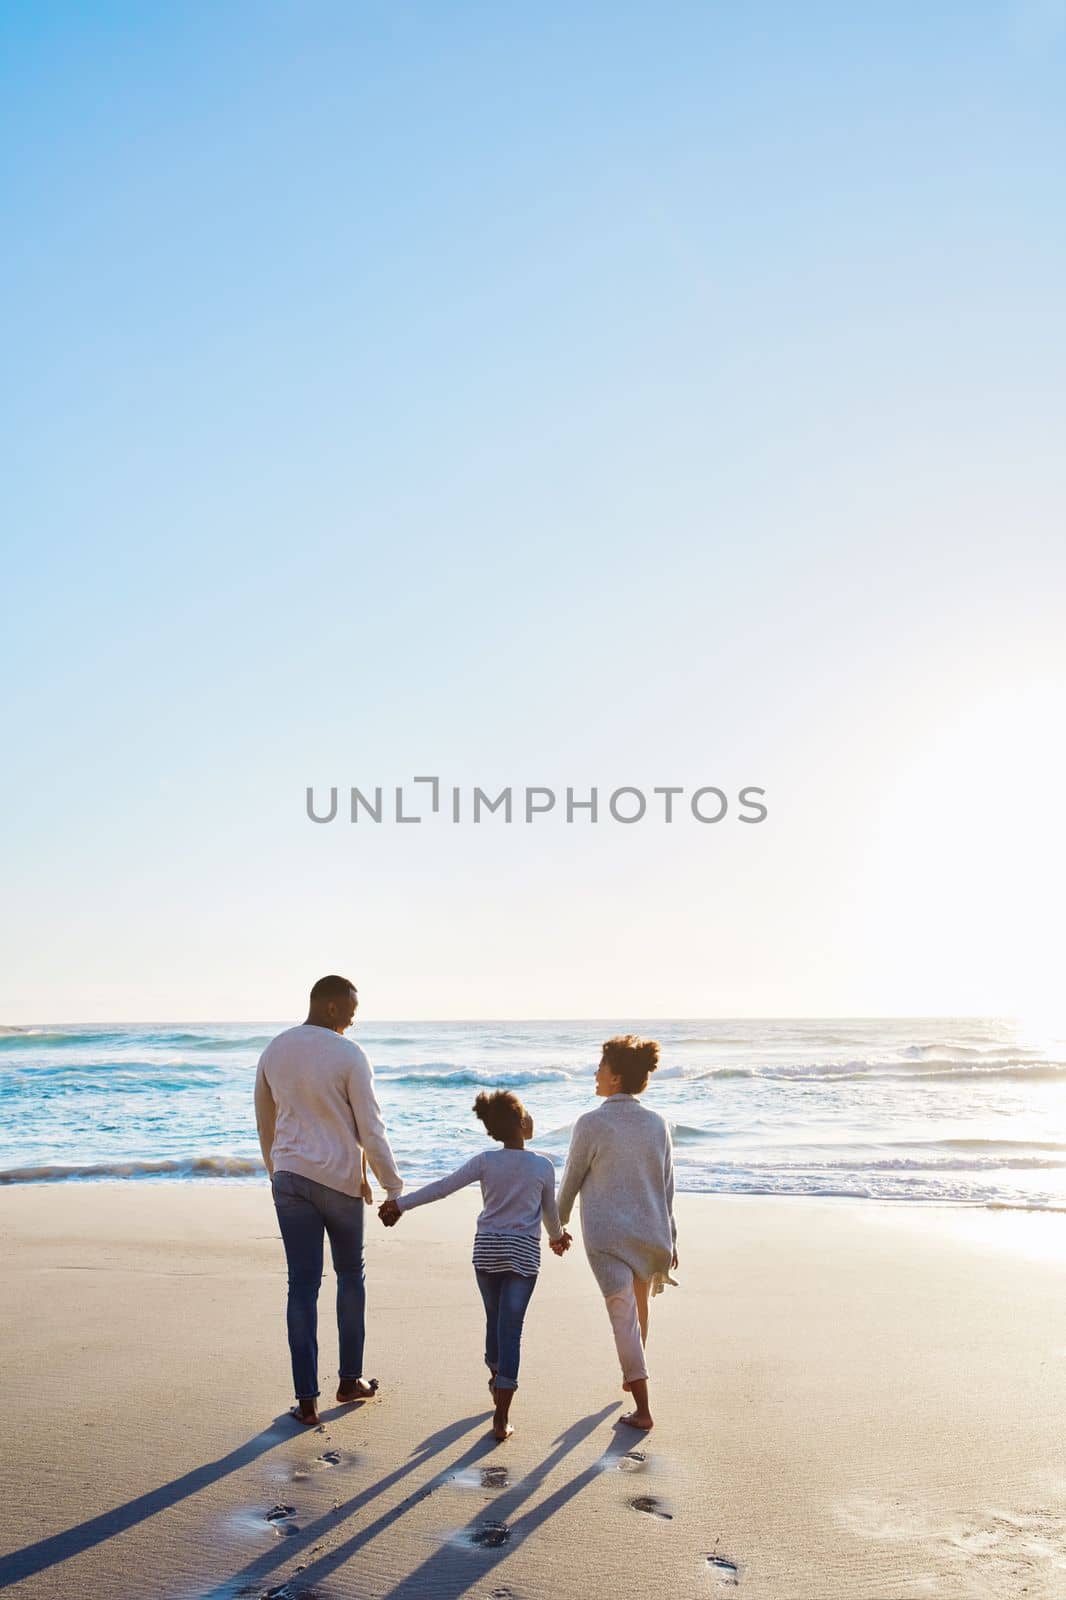 Family, beach and walk during sunset on vacation or holiday relaxing and enjoying peaceful scenery at the ocean. Sea, water and parents with daughter, child or kid with childhood freedom.